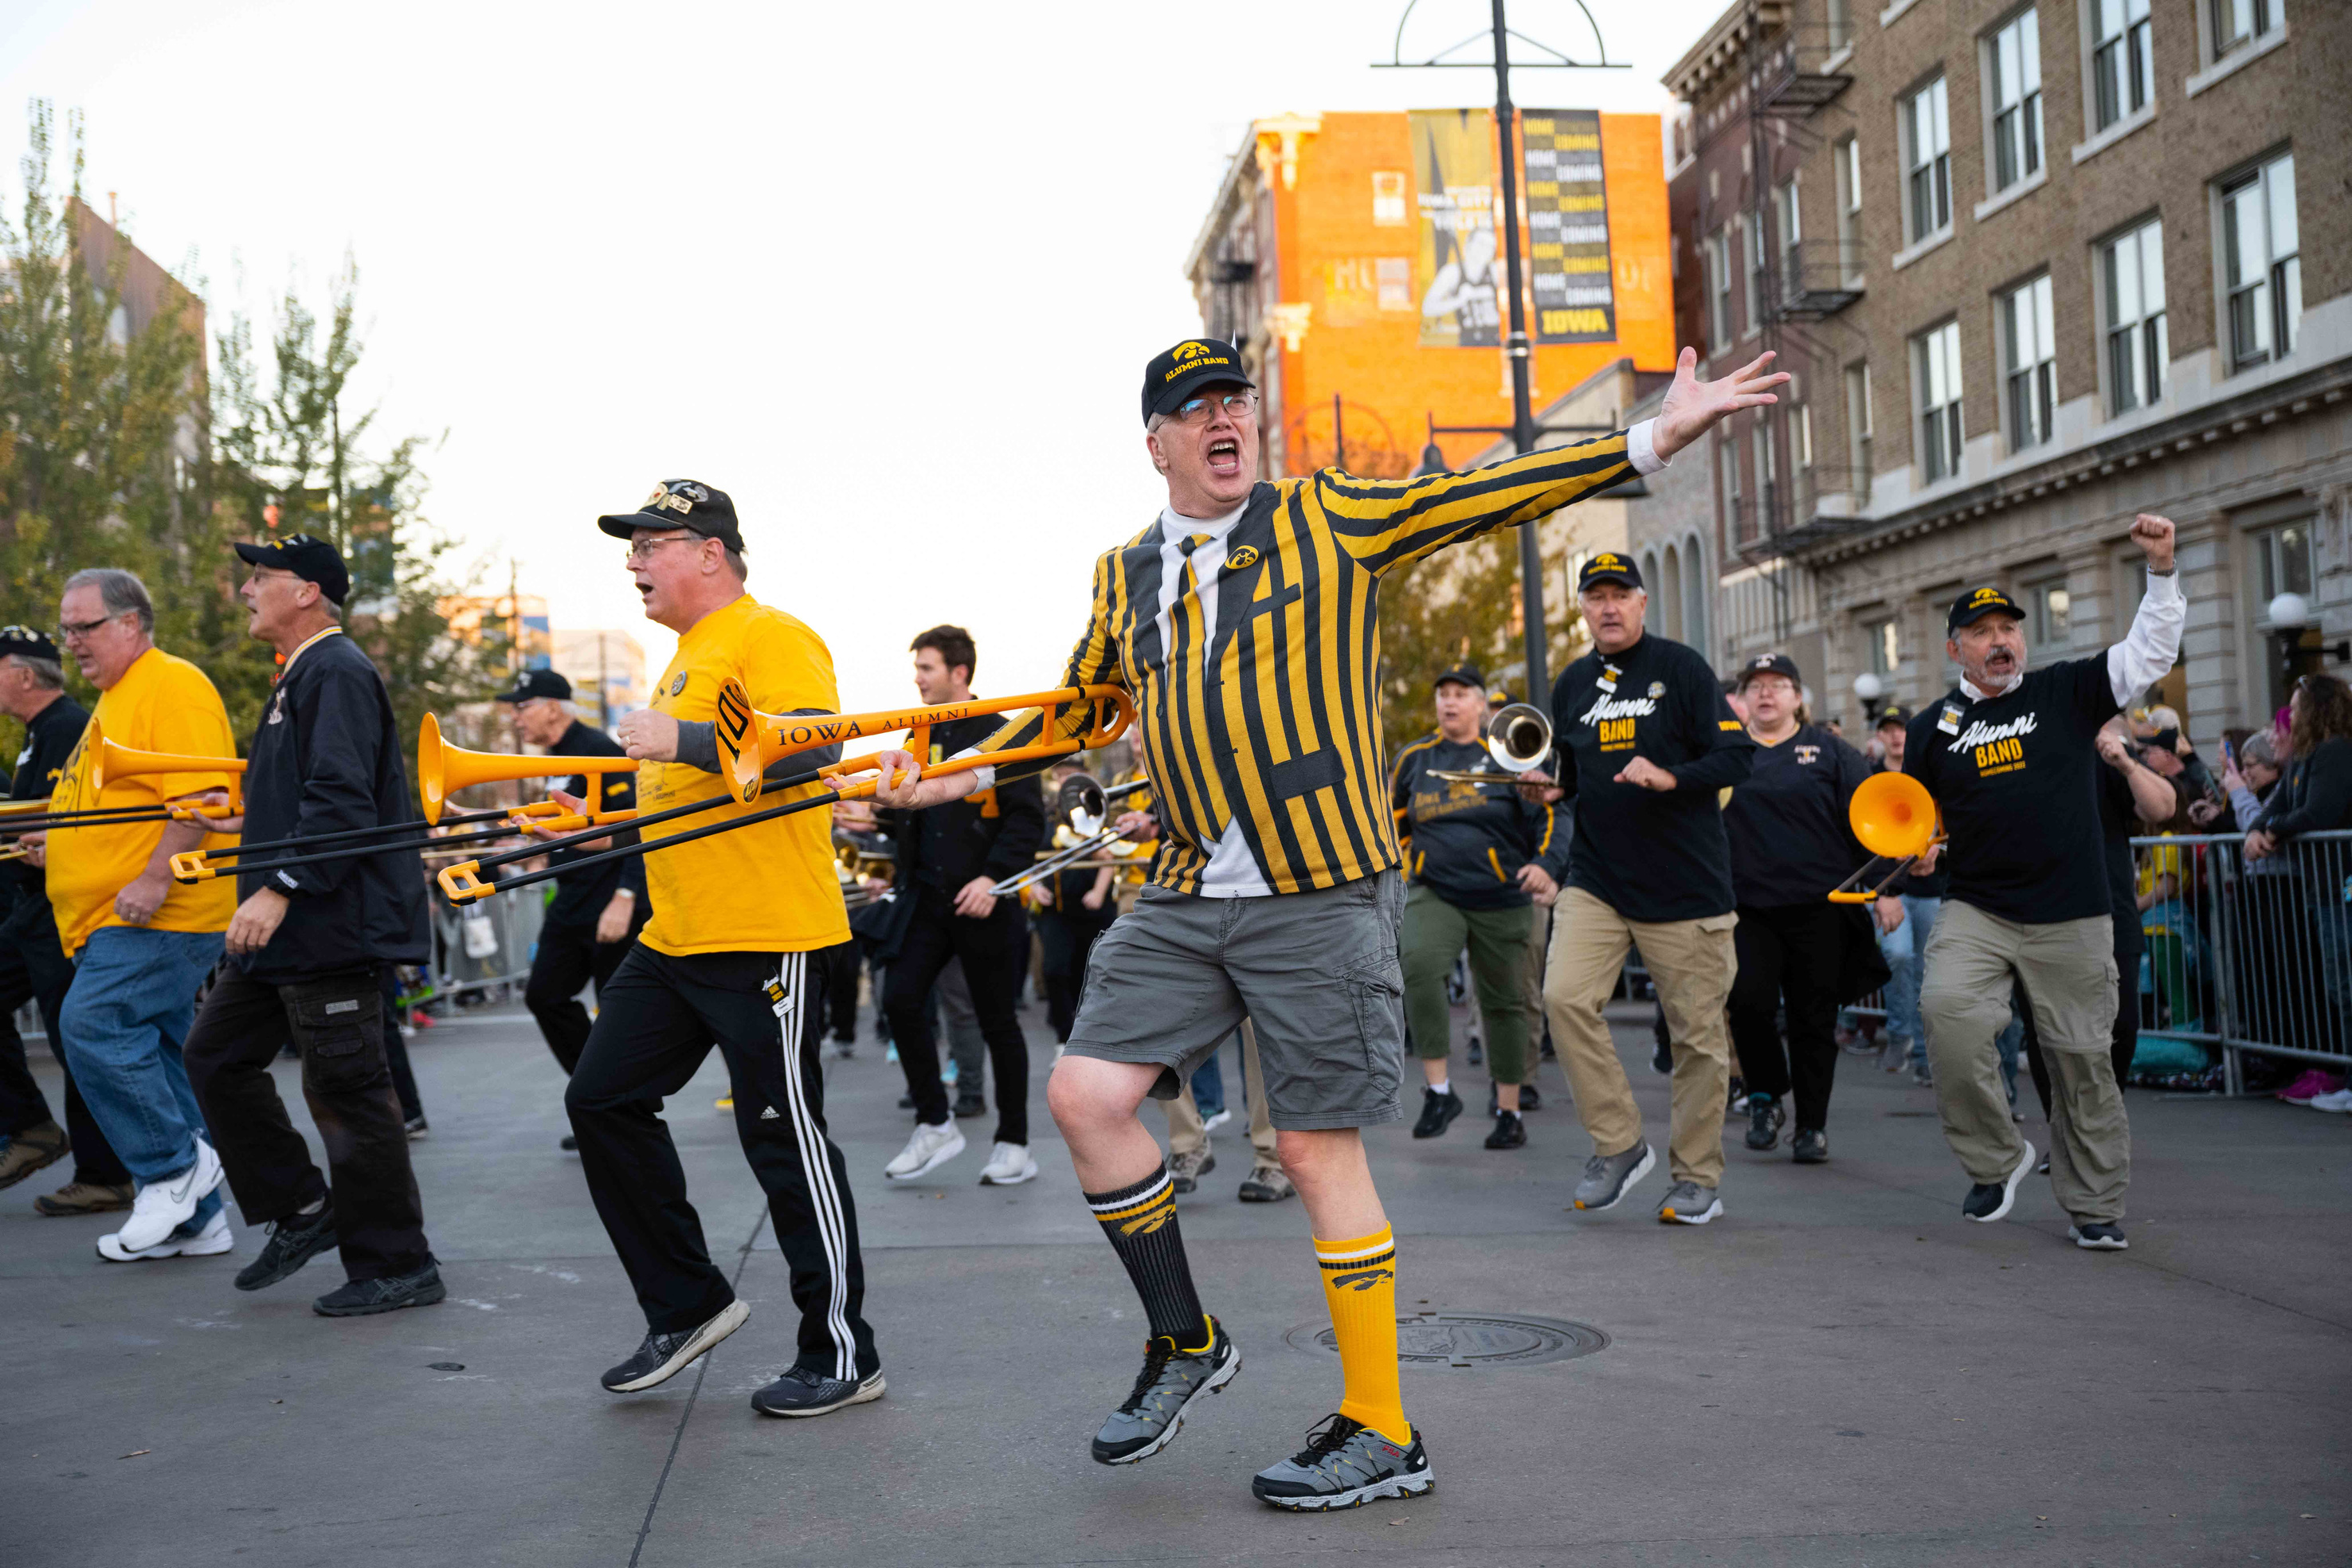 Members of the Iowa Alumni Marching Band marching in the 2022 Homecoming Parade